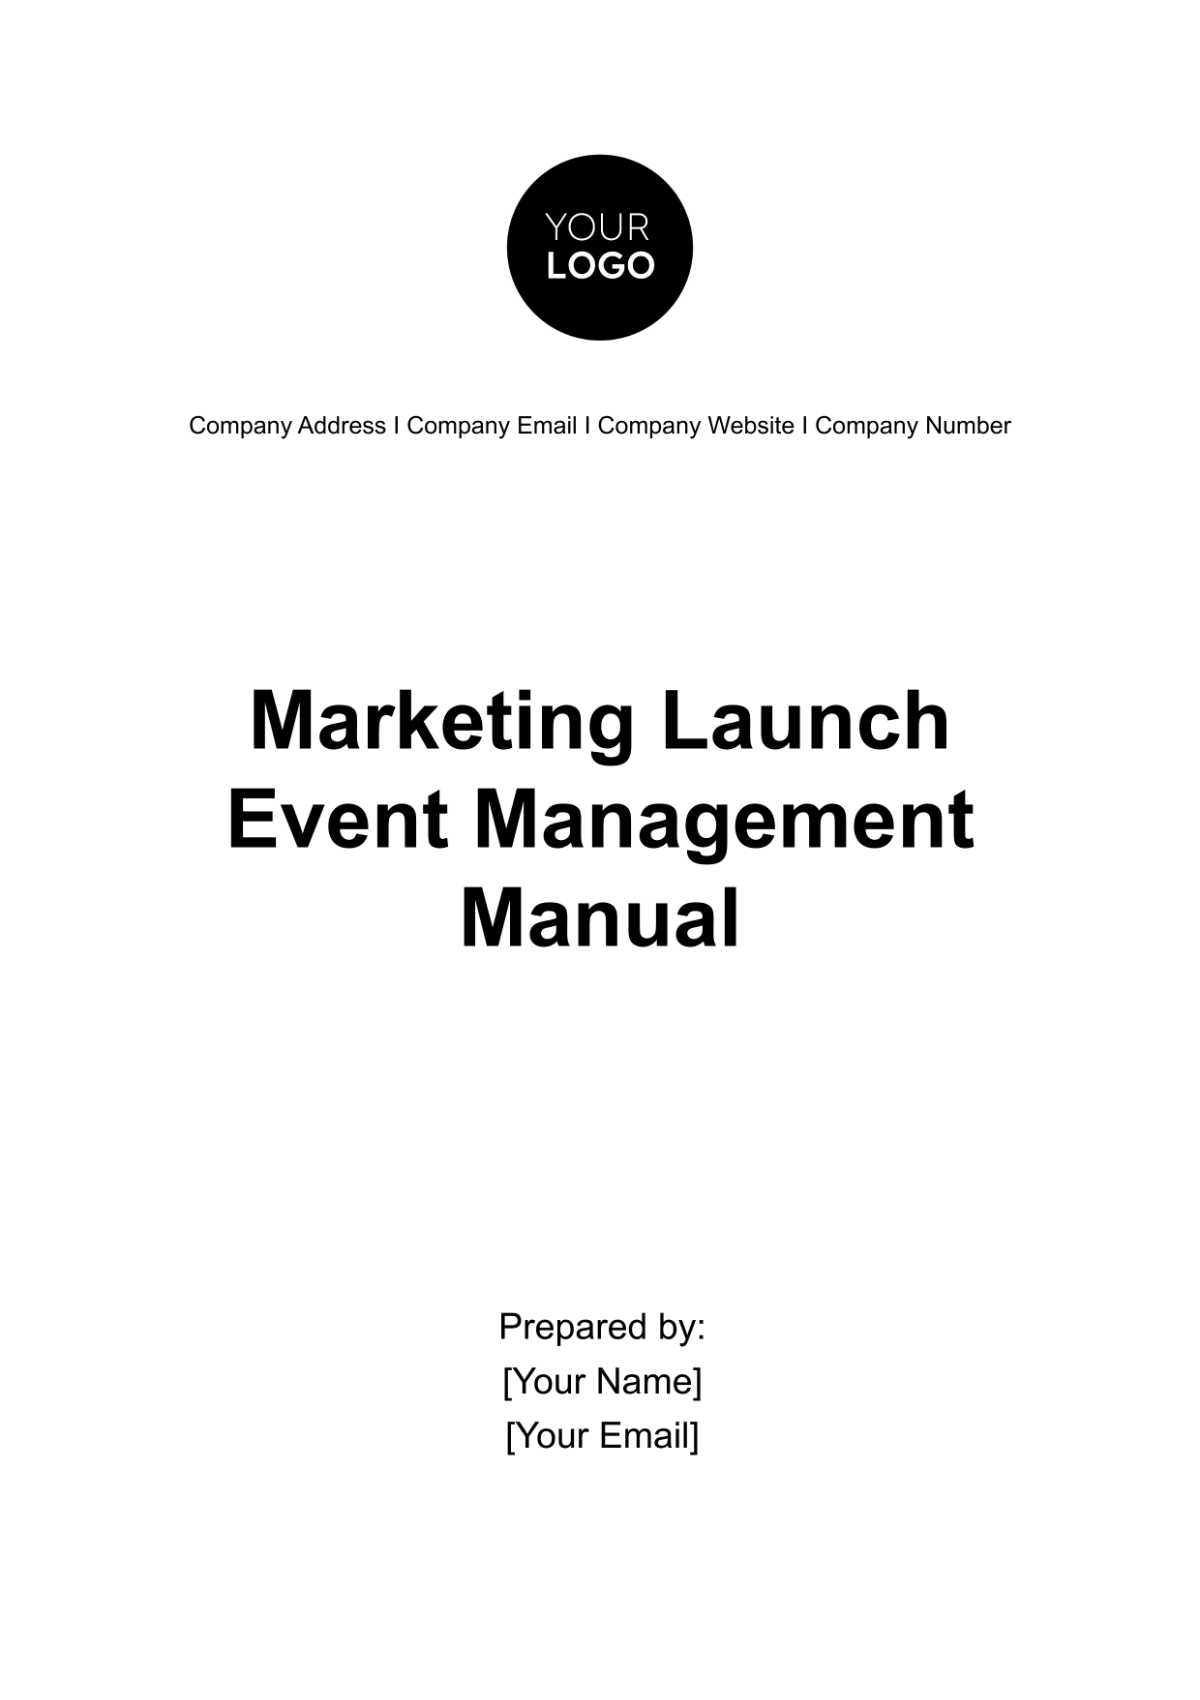 Marketing Launch Event Management Manual Template